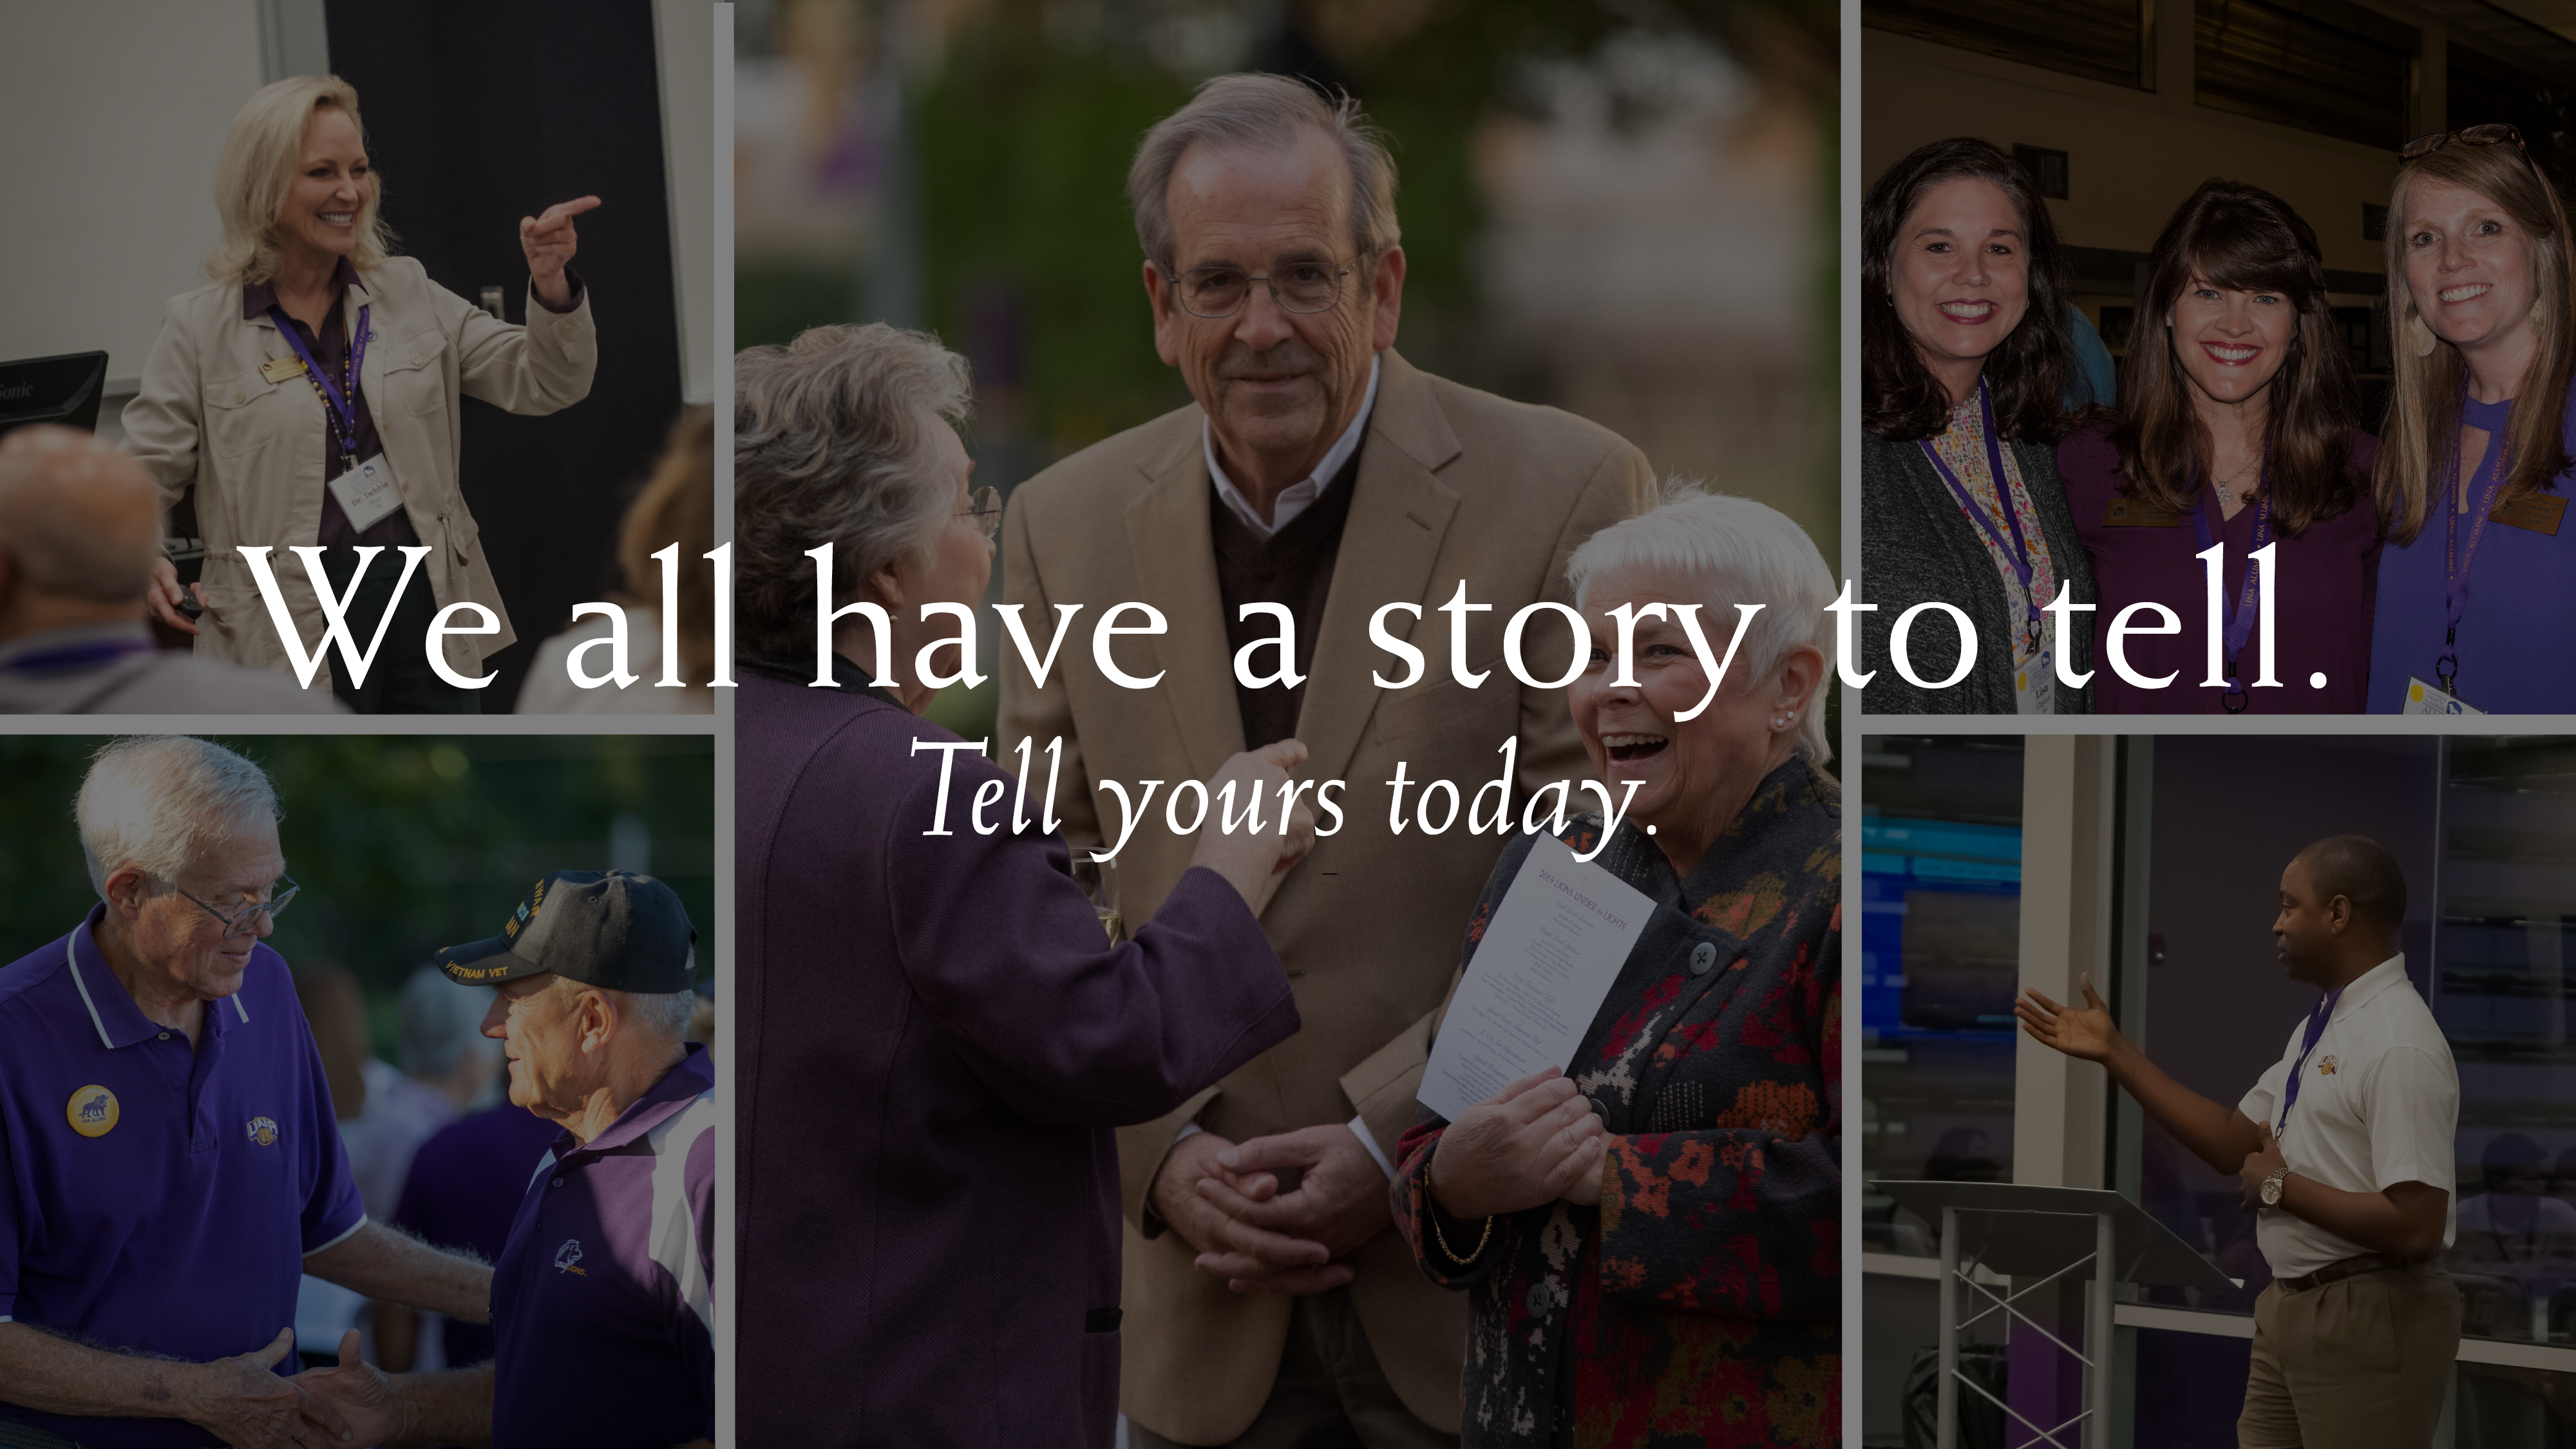 We all have a story to tell. Tell yours today.